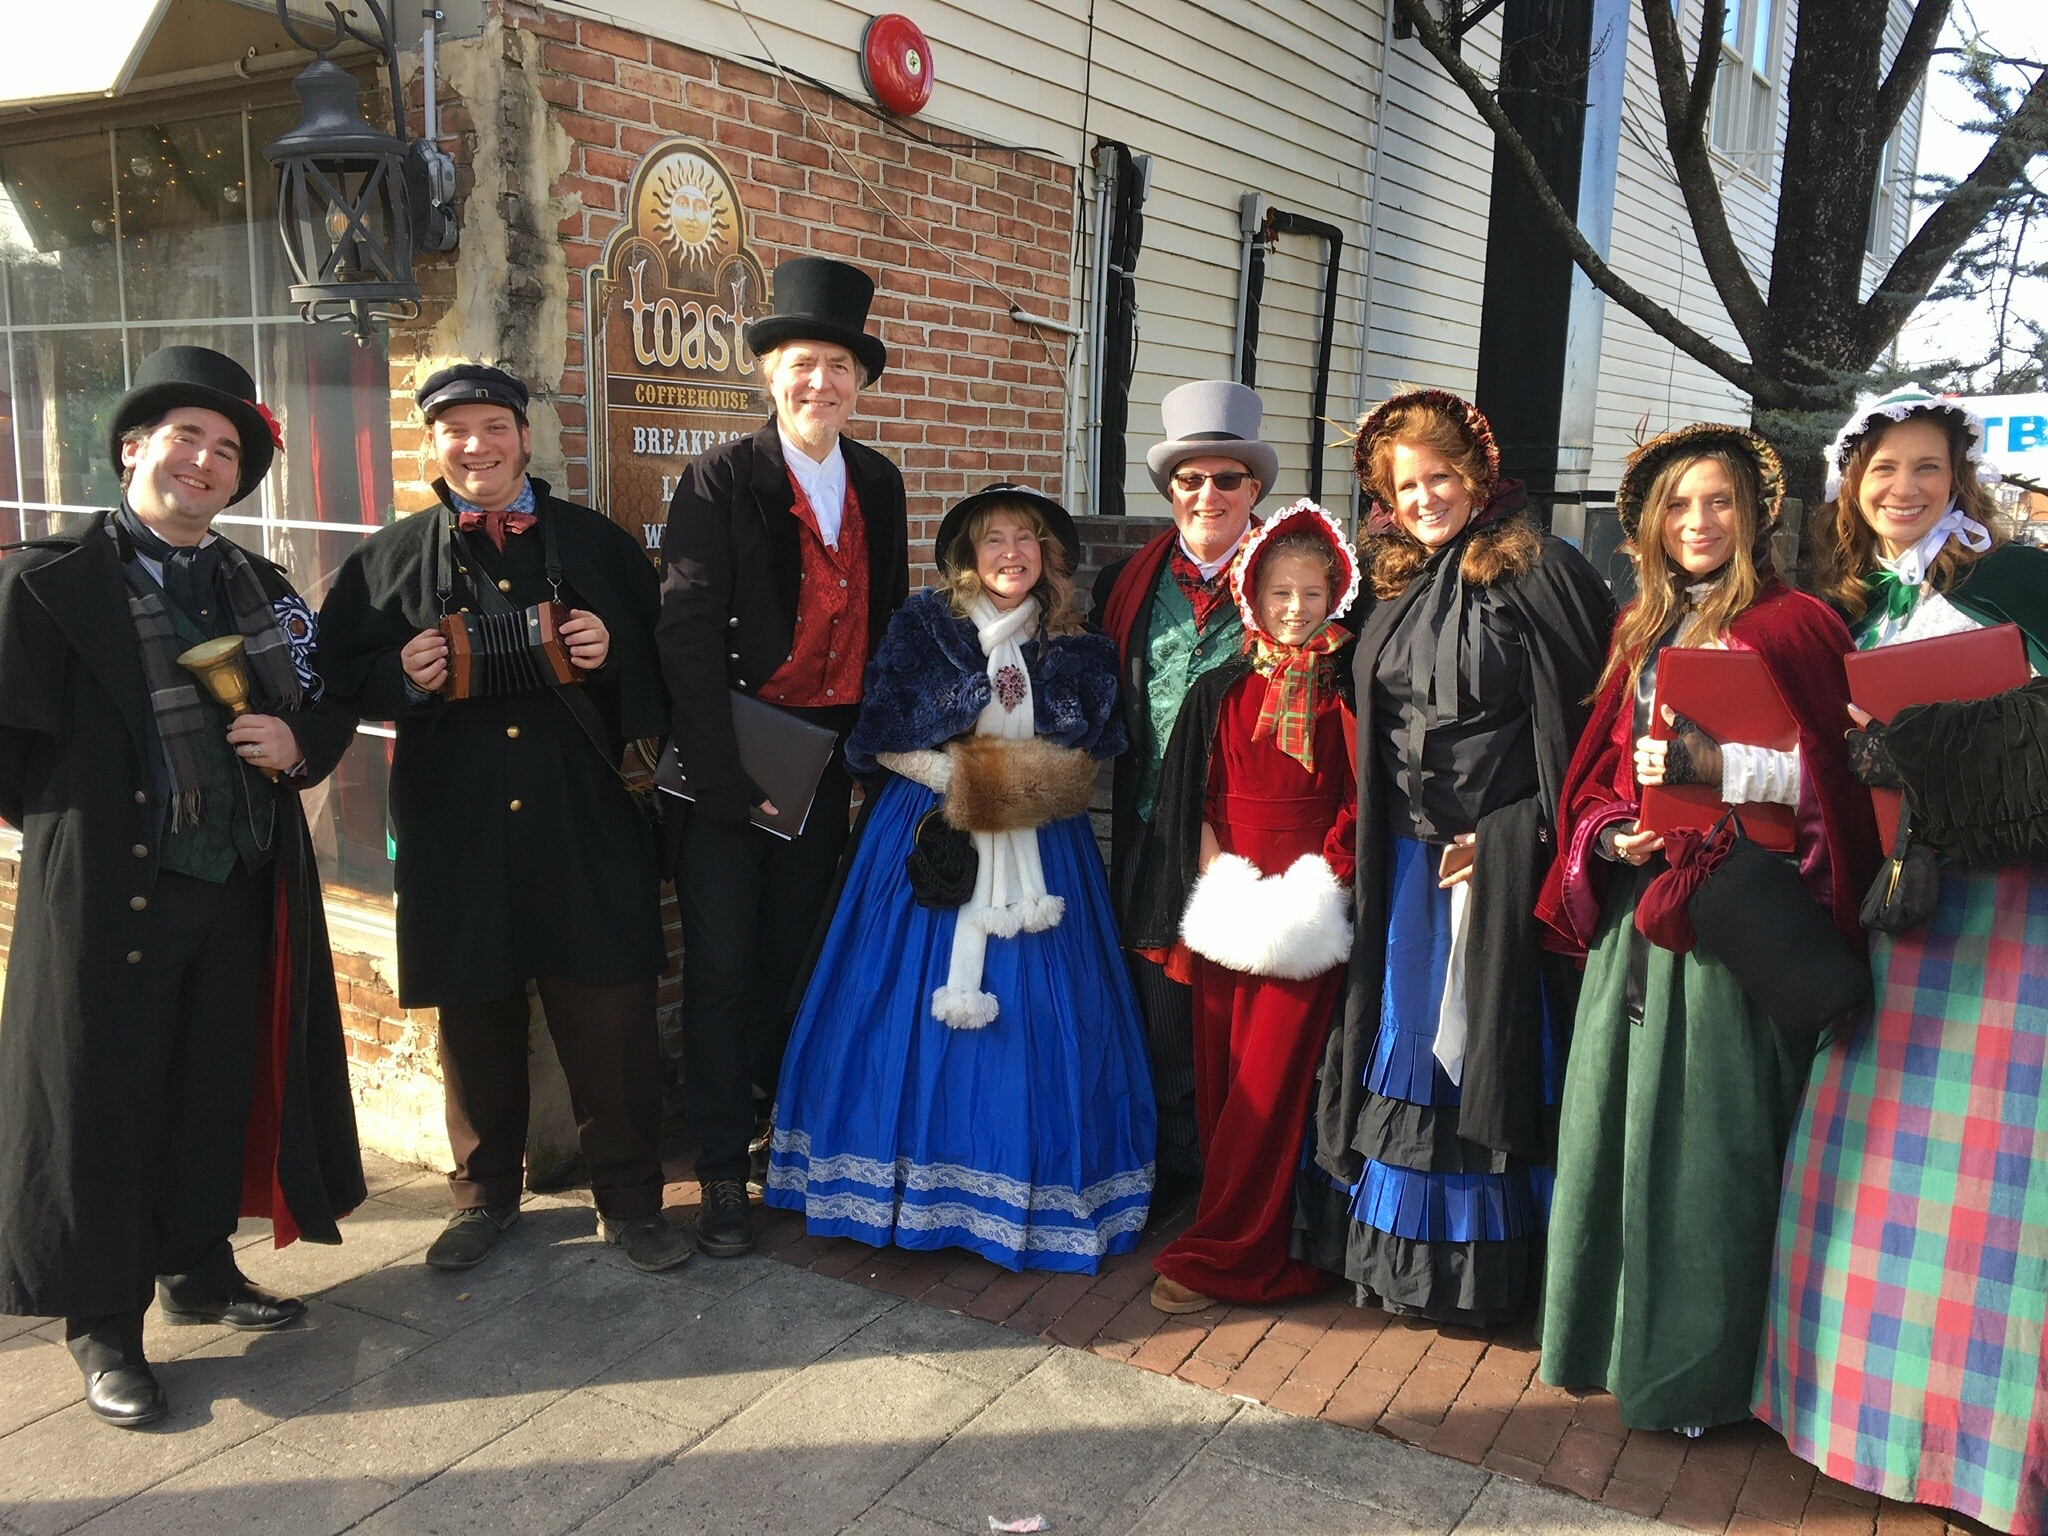 Bonnie Grice and The Dickens Carolers in previous years